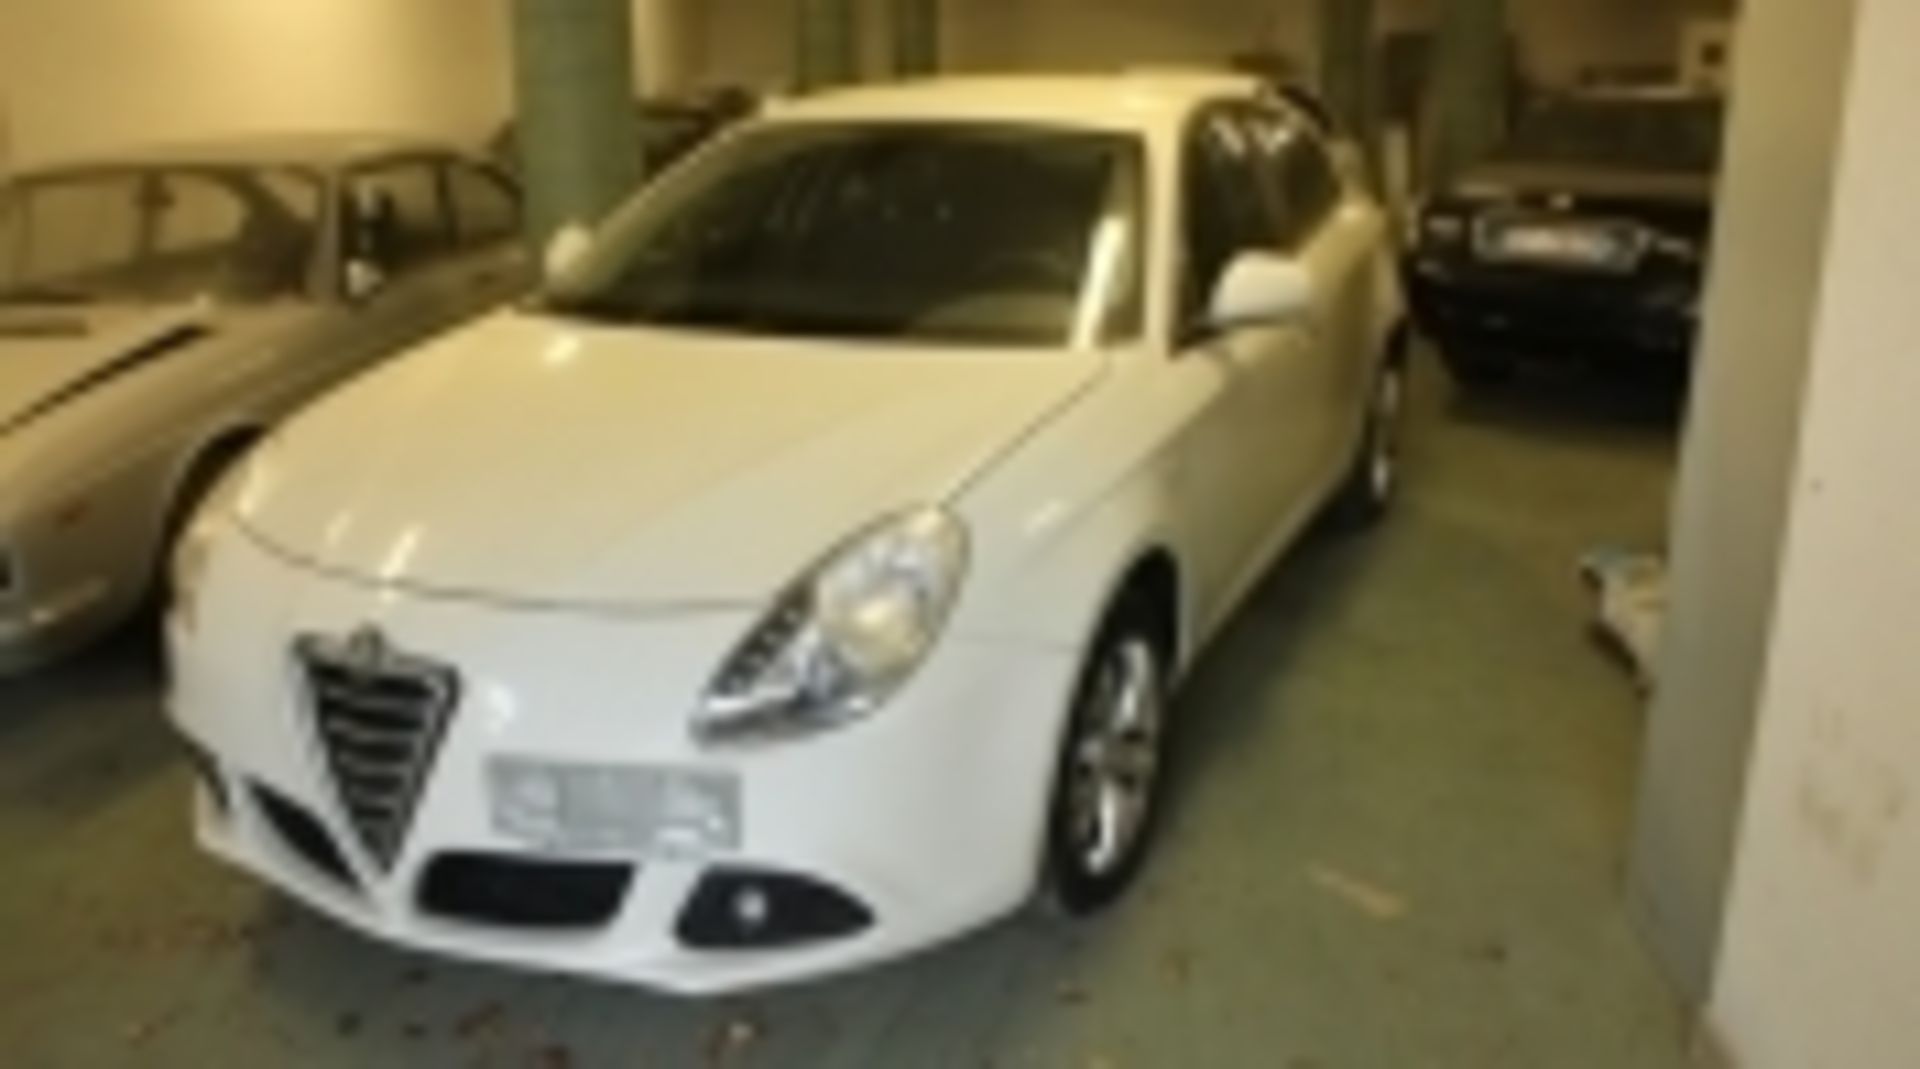 1,Giulietta Alfa Romeo car plate n.  8984HLK diesel, about  50.000/60.000 km. without keys Click - Image 2 of 4